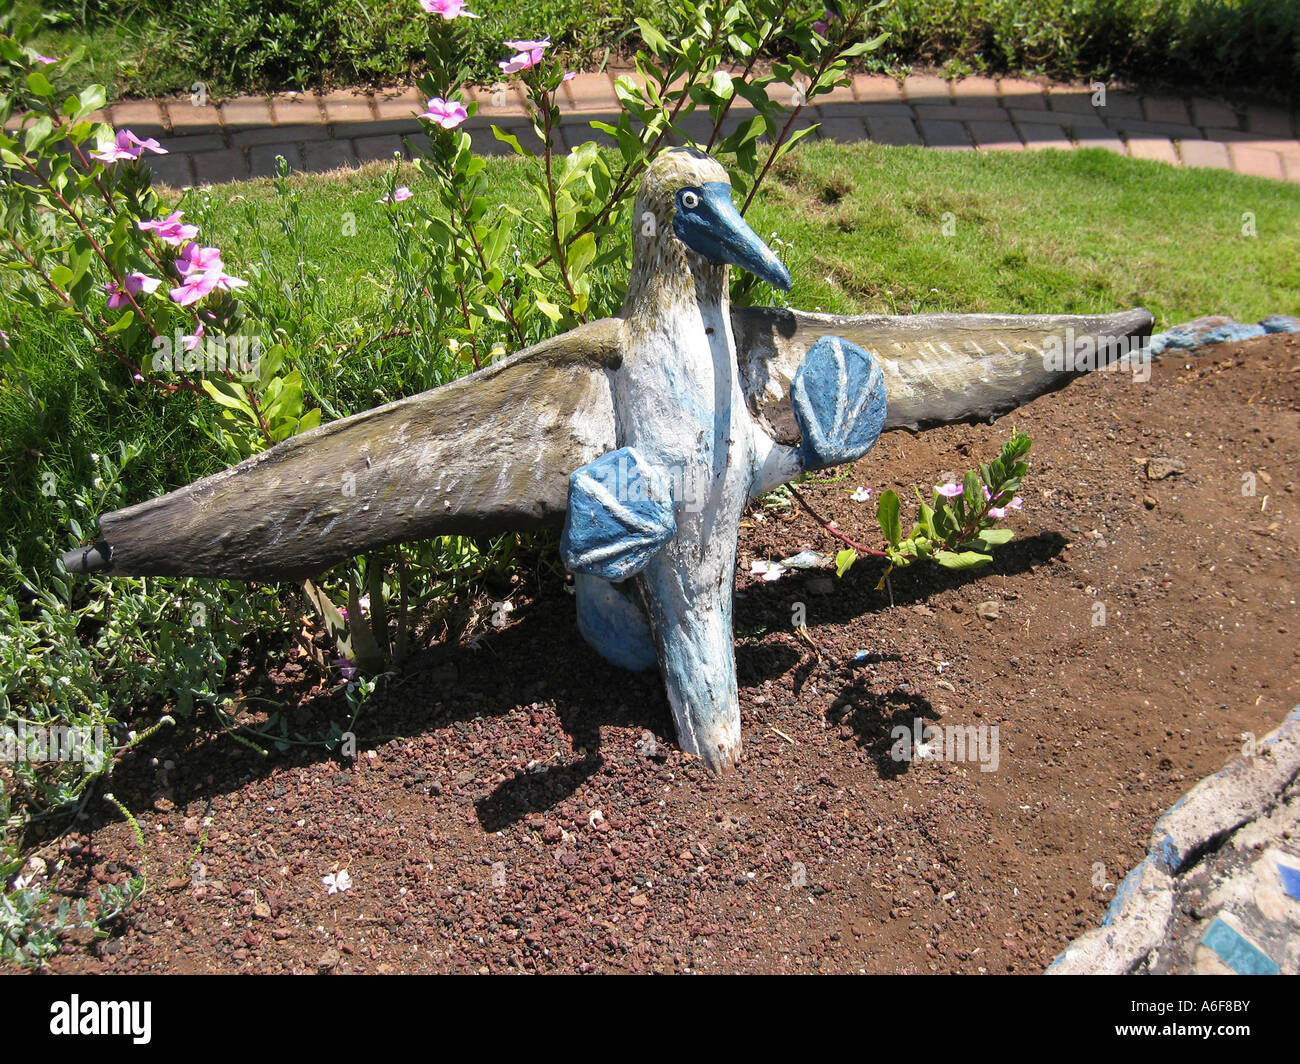 A model of a Blue Footed booby at Puerto Ayora on the island of Santa Cruz in the Galapagos Archipelago Pacific Ocean Ecuador Stock Photo